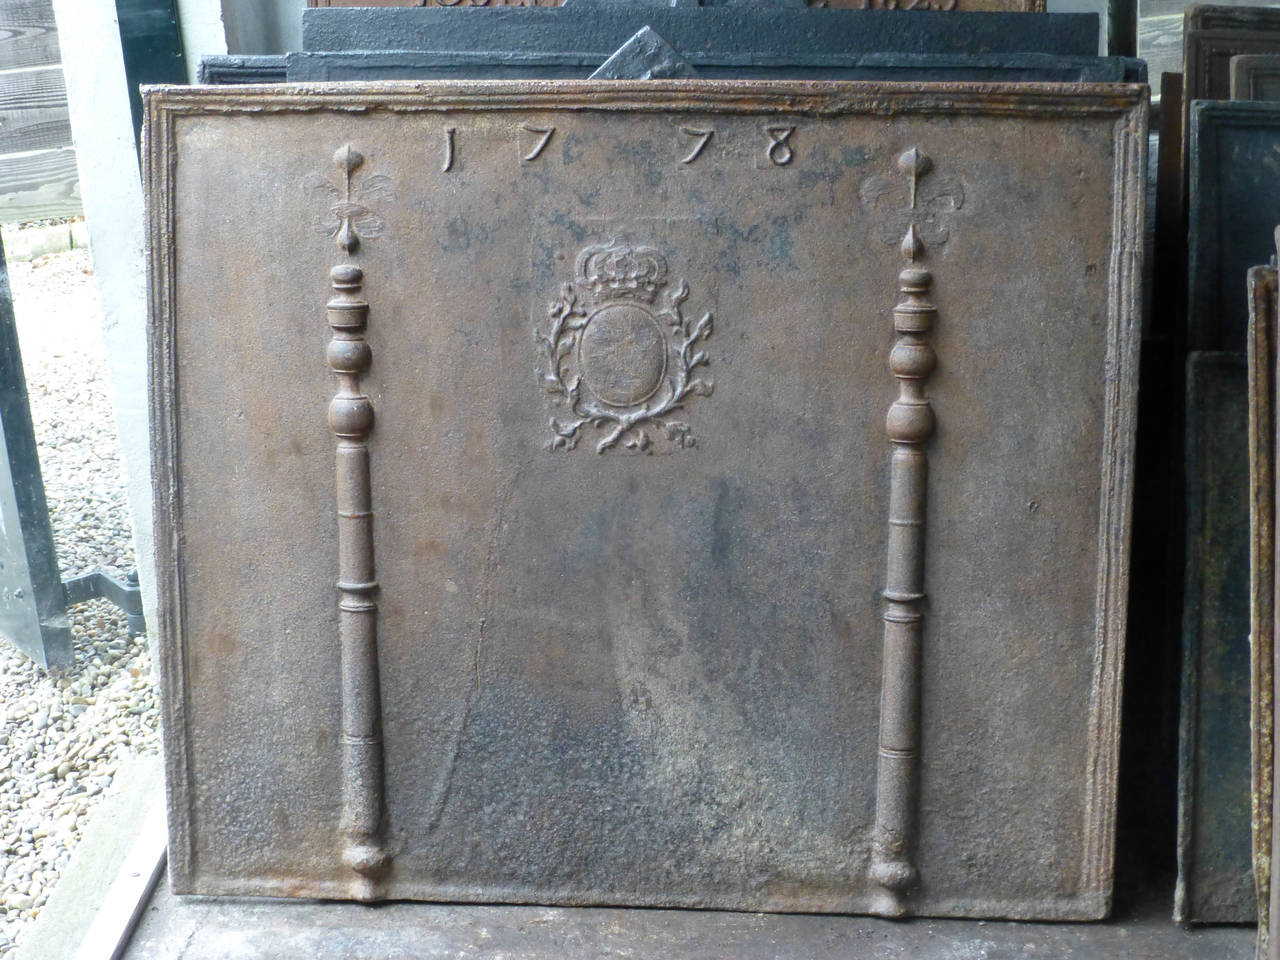 With Arms of France and the date 1778. The fleurs de Lys are partially truncated after the French Revolution.

We have a unique and specialized collection of antique and used fireplace accessories consisting of more than 1000 listings at 1stdibs.